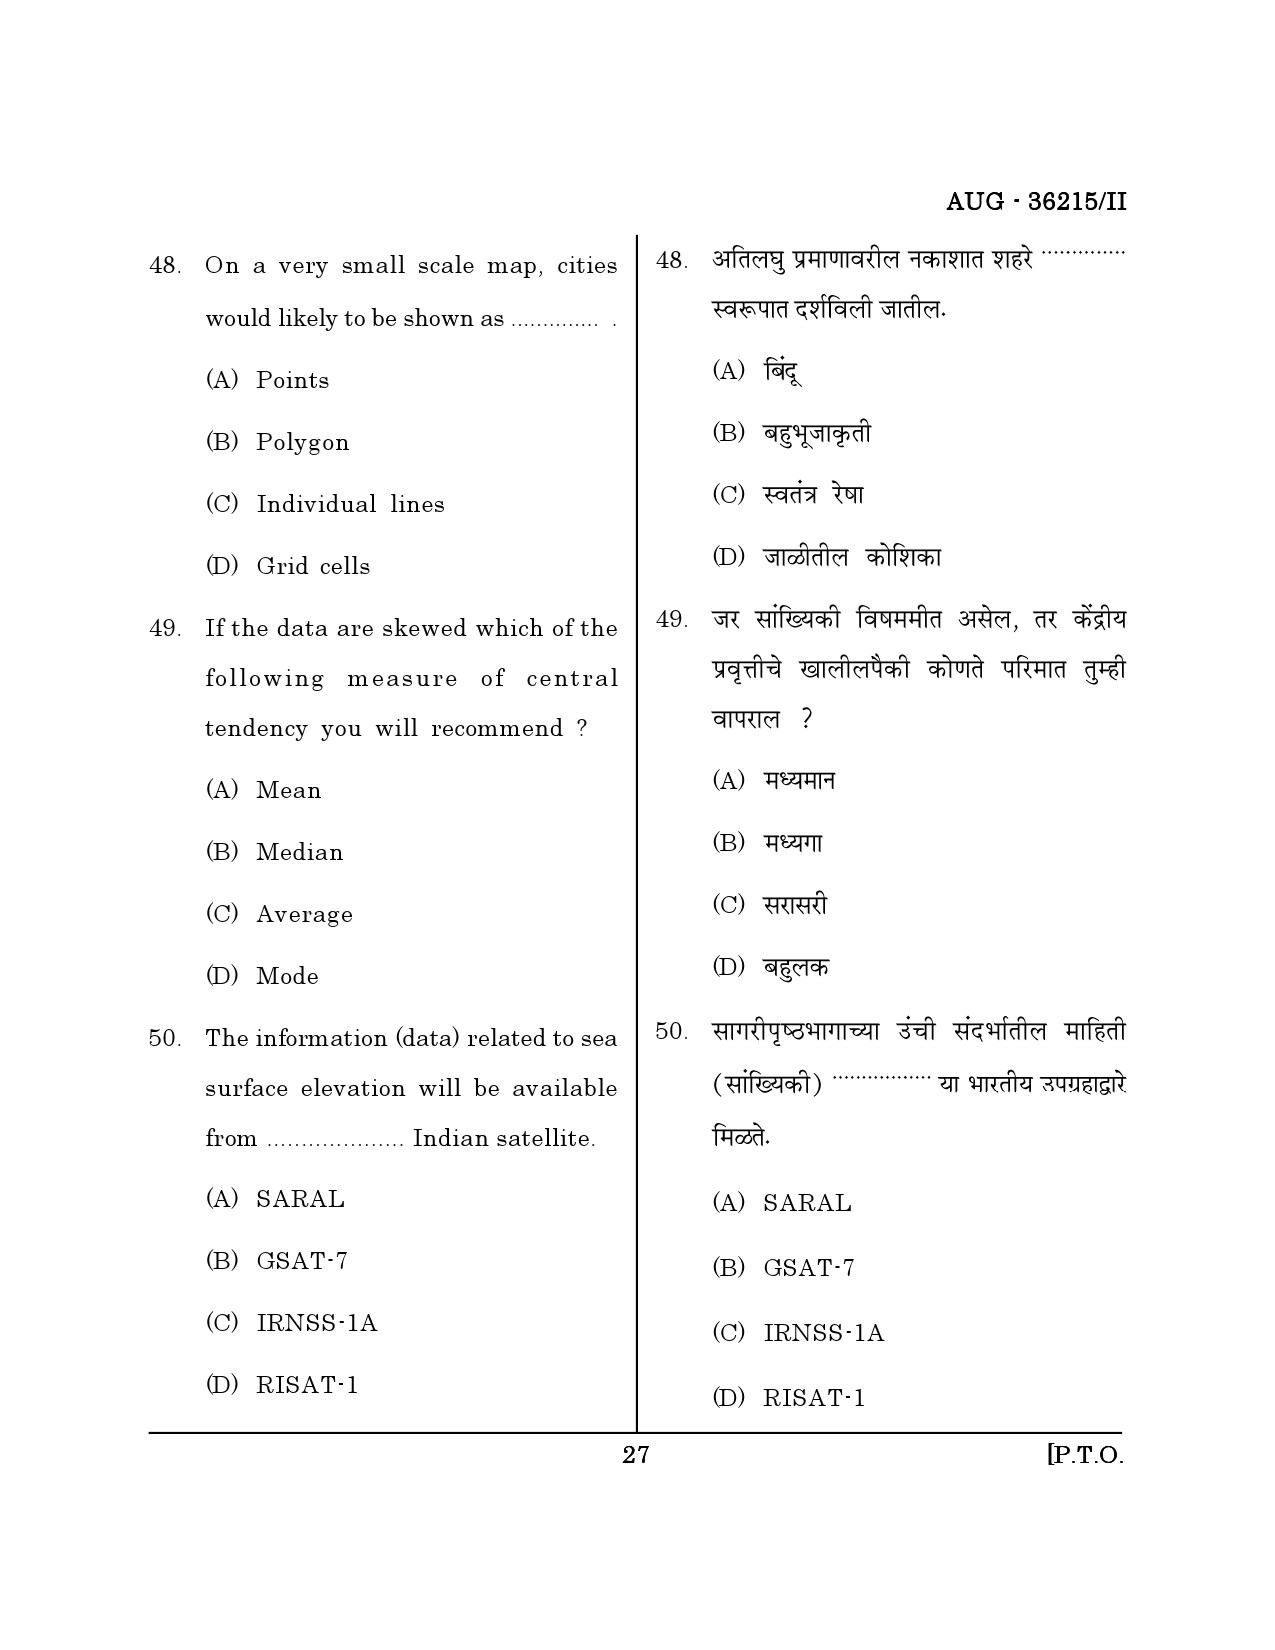 Maharashtra SET Geography Question Paper II August 2015 26